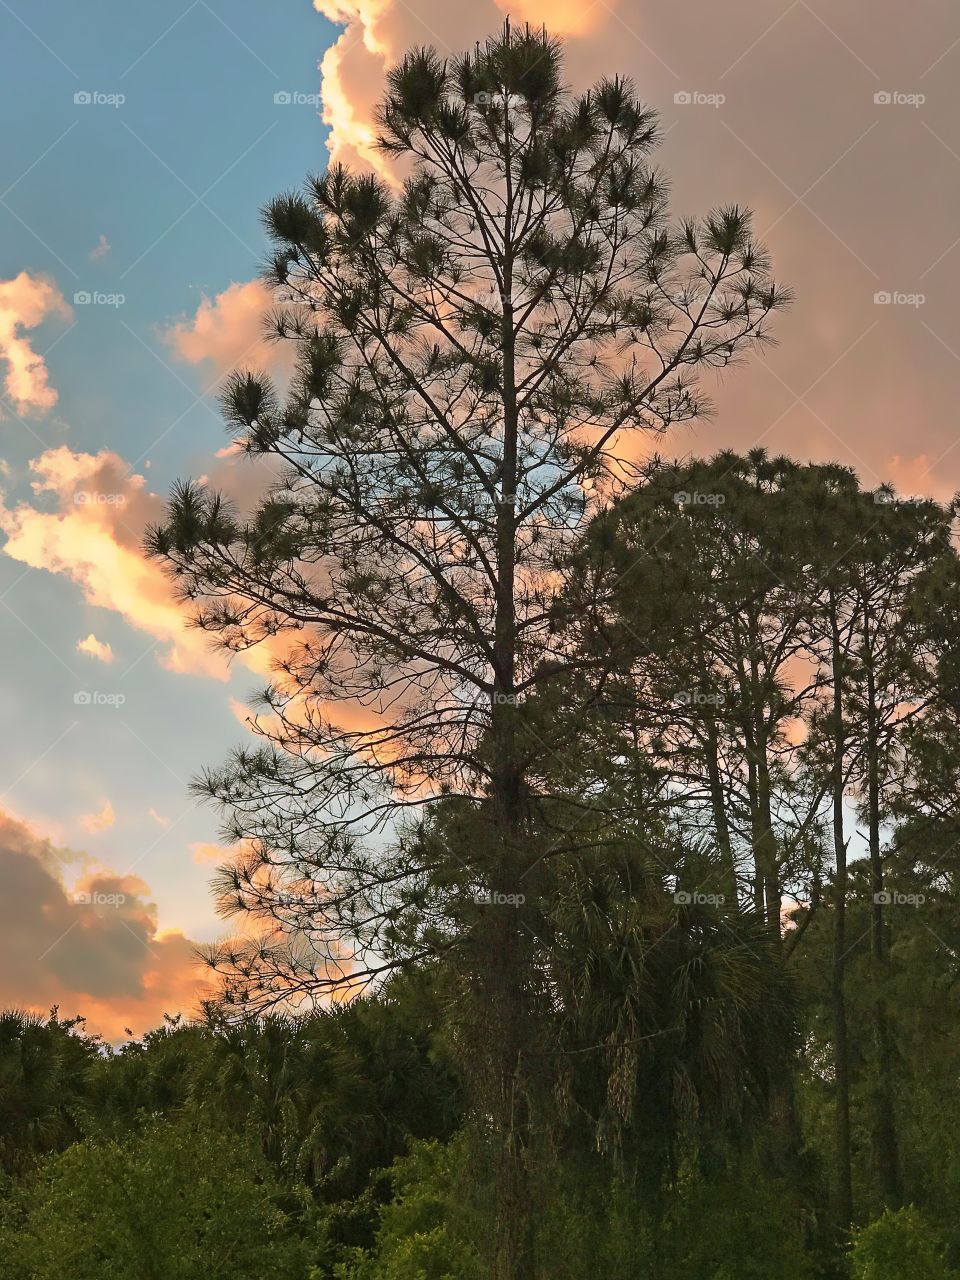 Pine tree silhouette against colorful clouds.